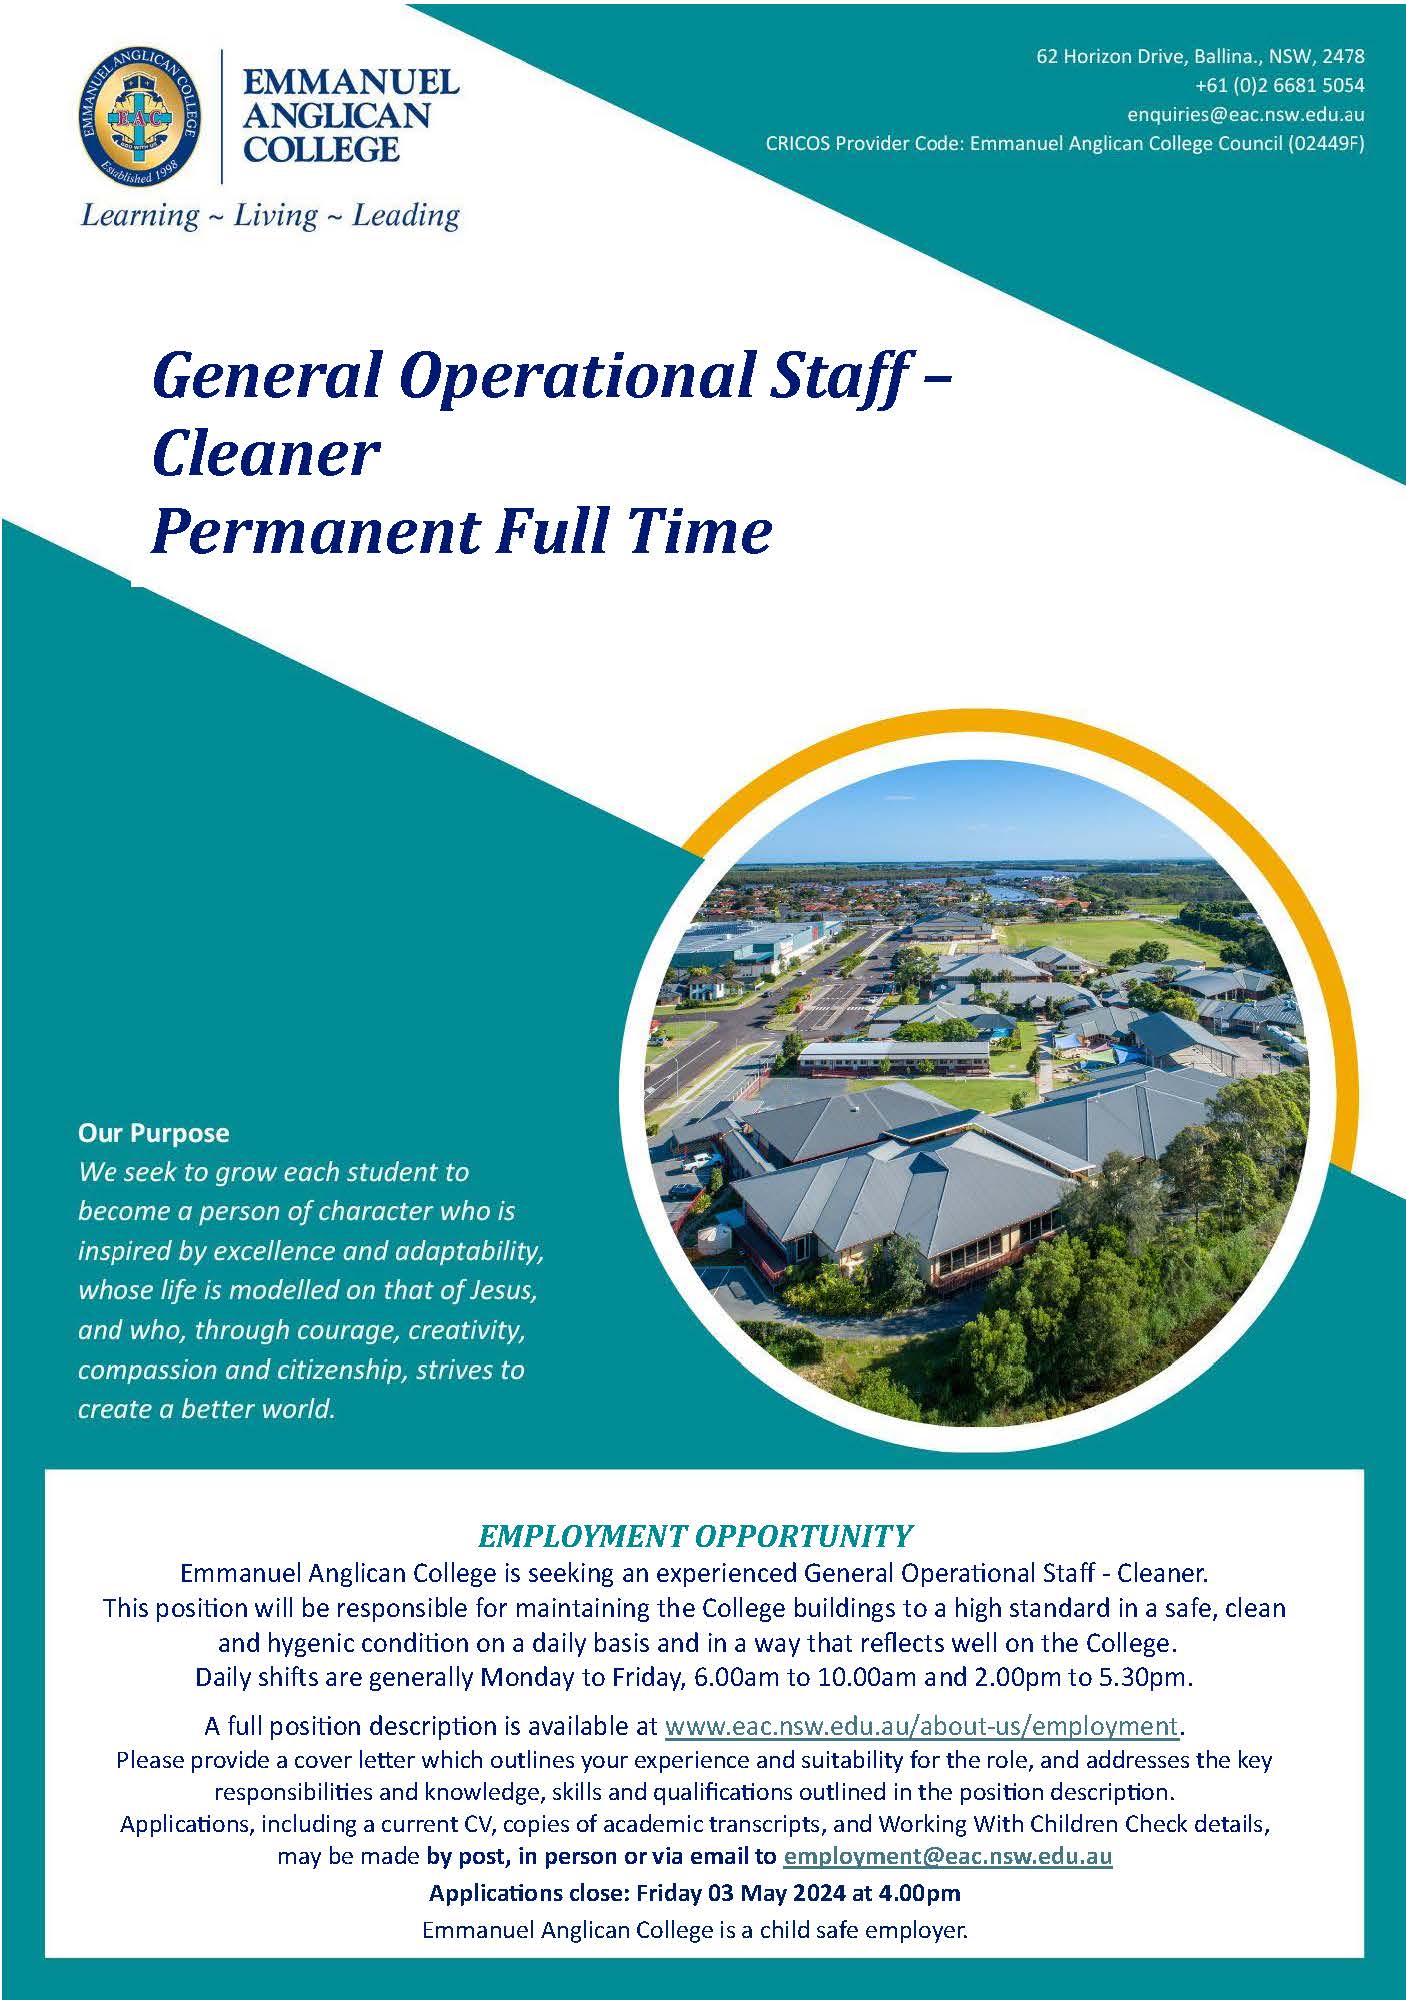 General Operational Staff - Cleaner